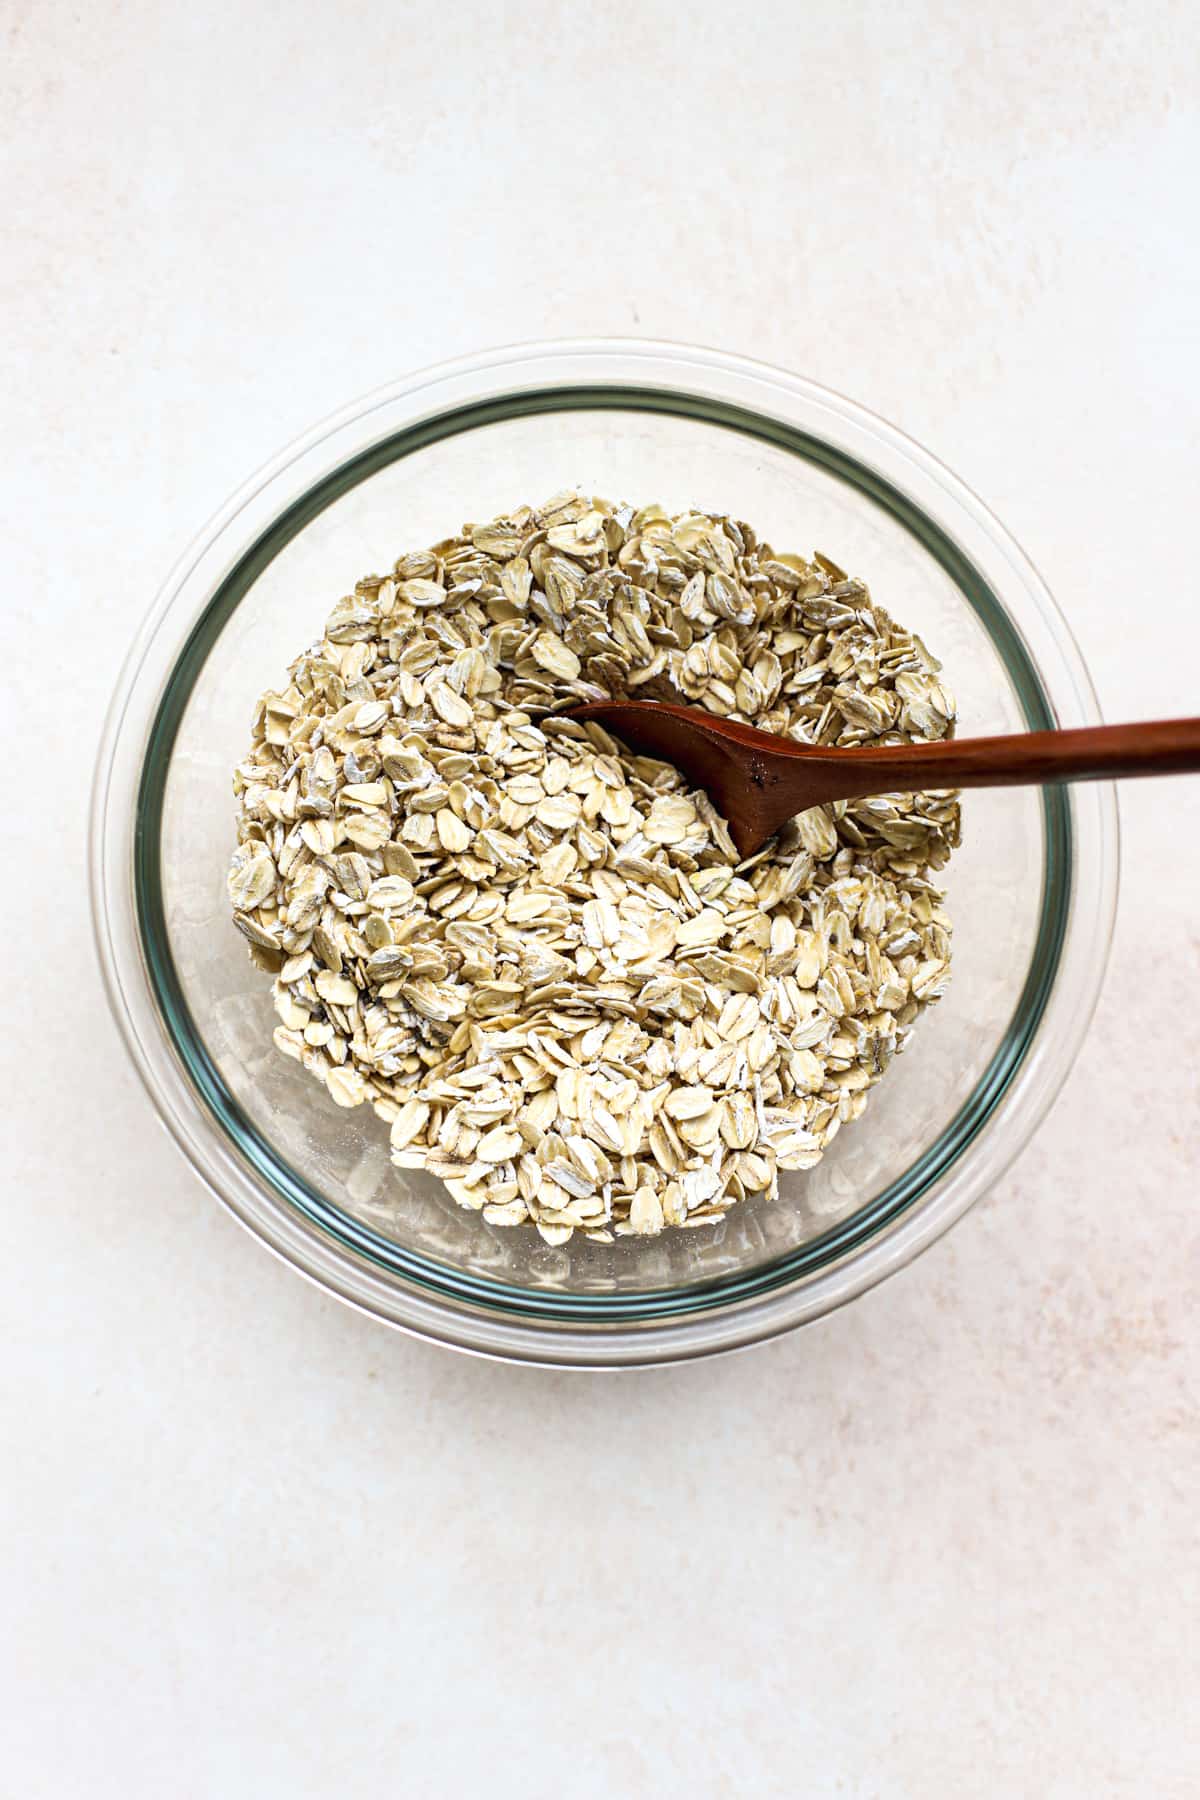 Oats, chia seeds, and salt mixed together in clear glass bowl with wooden spoon